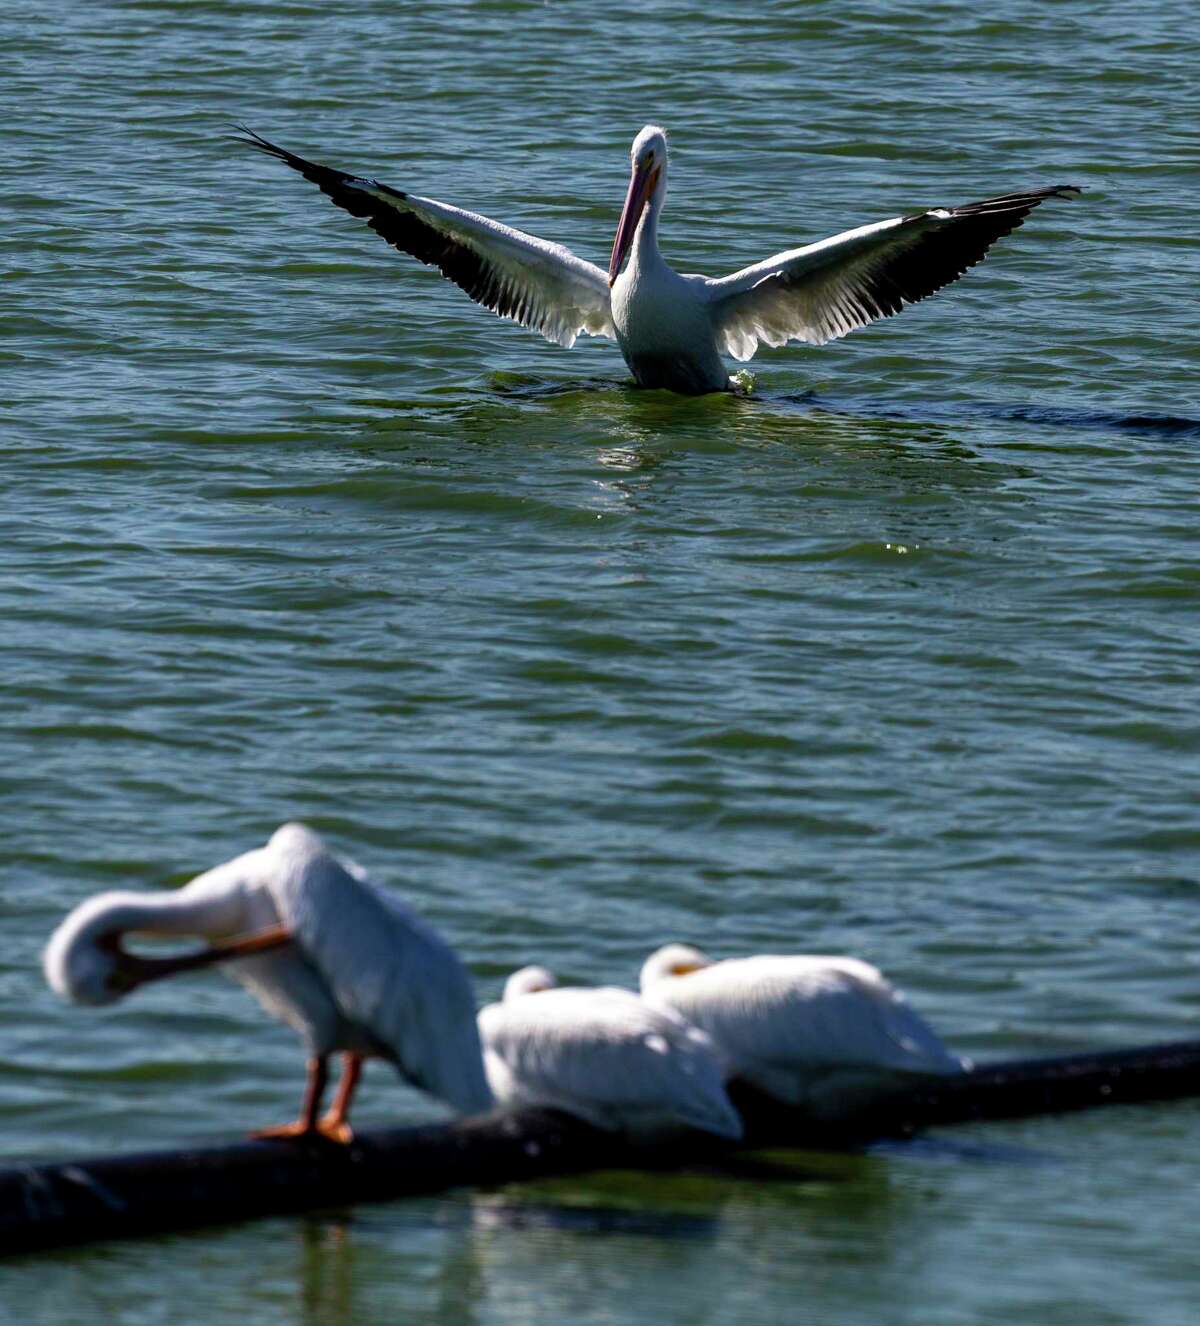 American white pelicans are seen at the Mitchell Lake Audubon Center on the South Side on Thursday, Jan. 6, 2022. Though the pelicans are usual residents of the area, the warmer-than-usual winter has resulted in other migratory birds not following their usual migration patterns.